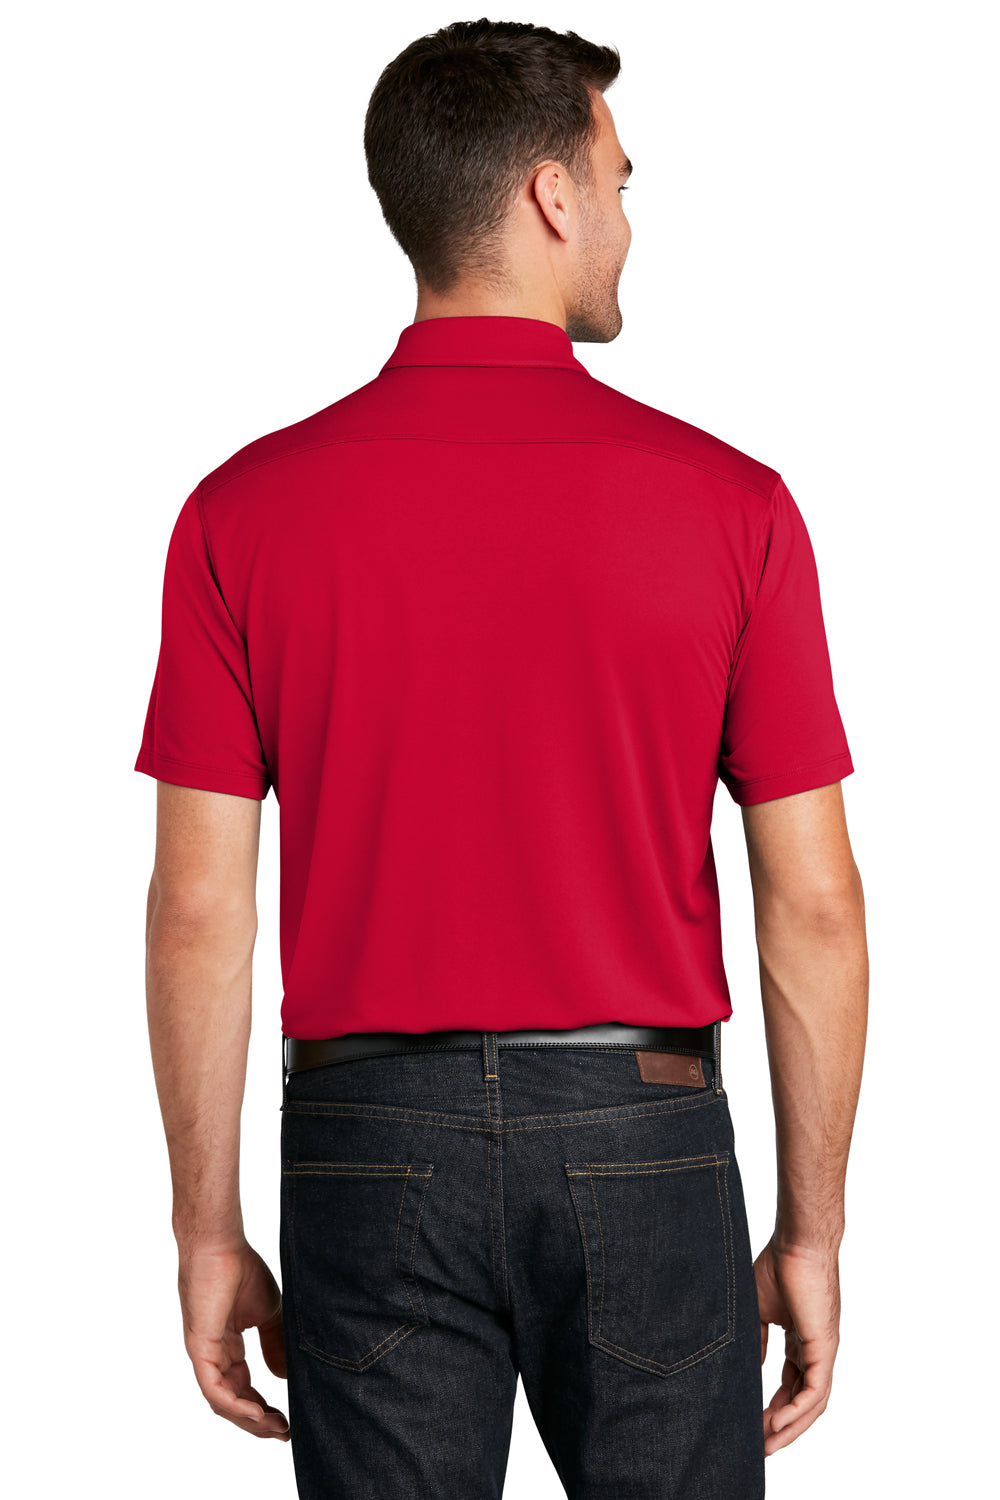 Port Authority Mens Choice Short Sleeve Polo Shirt Rich Red Side